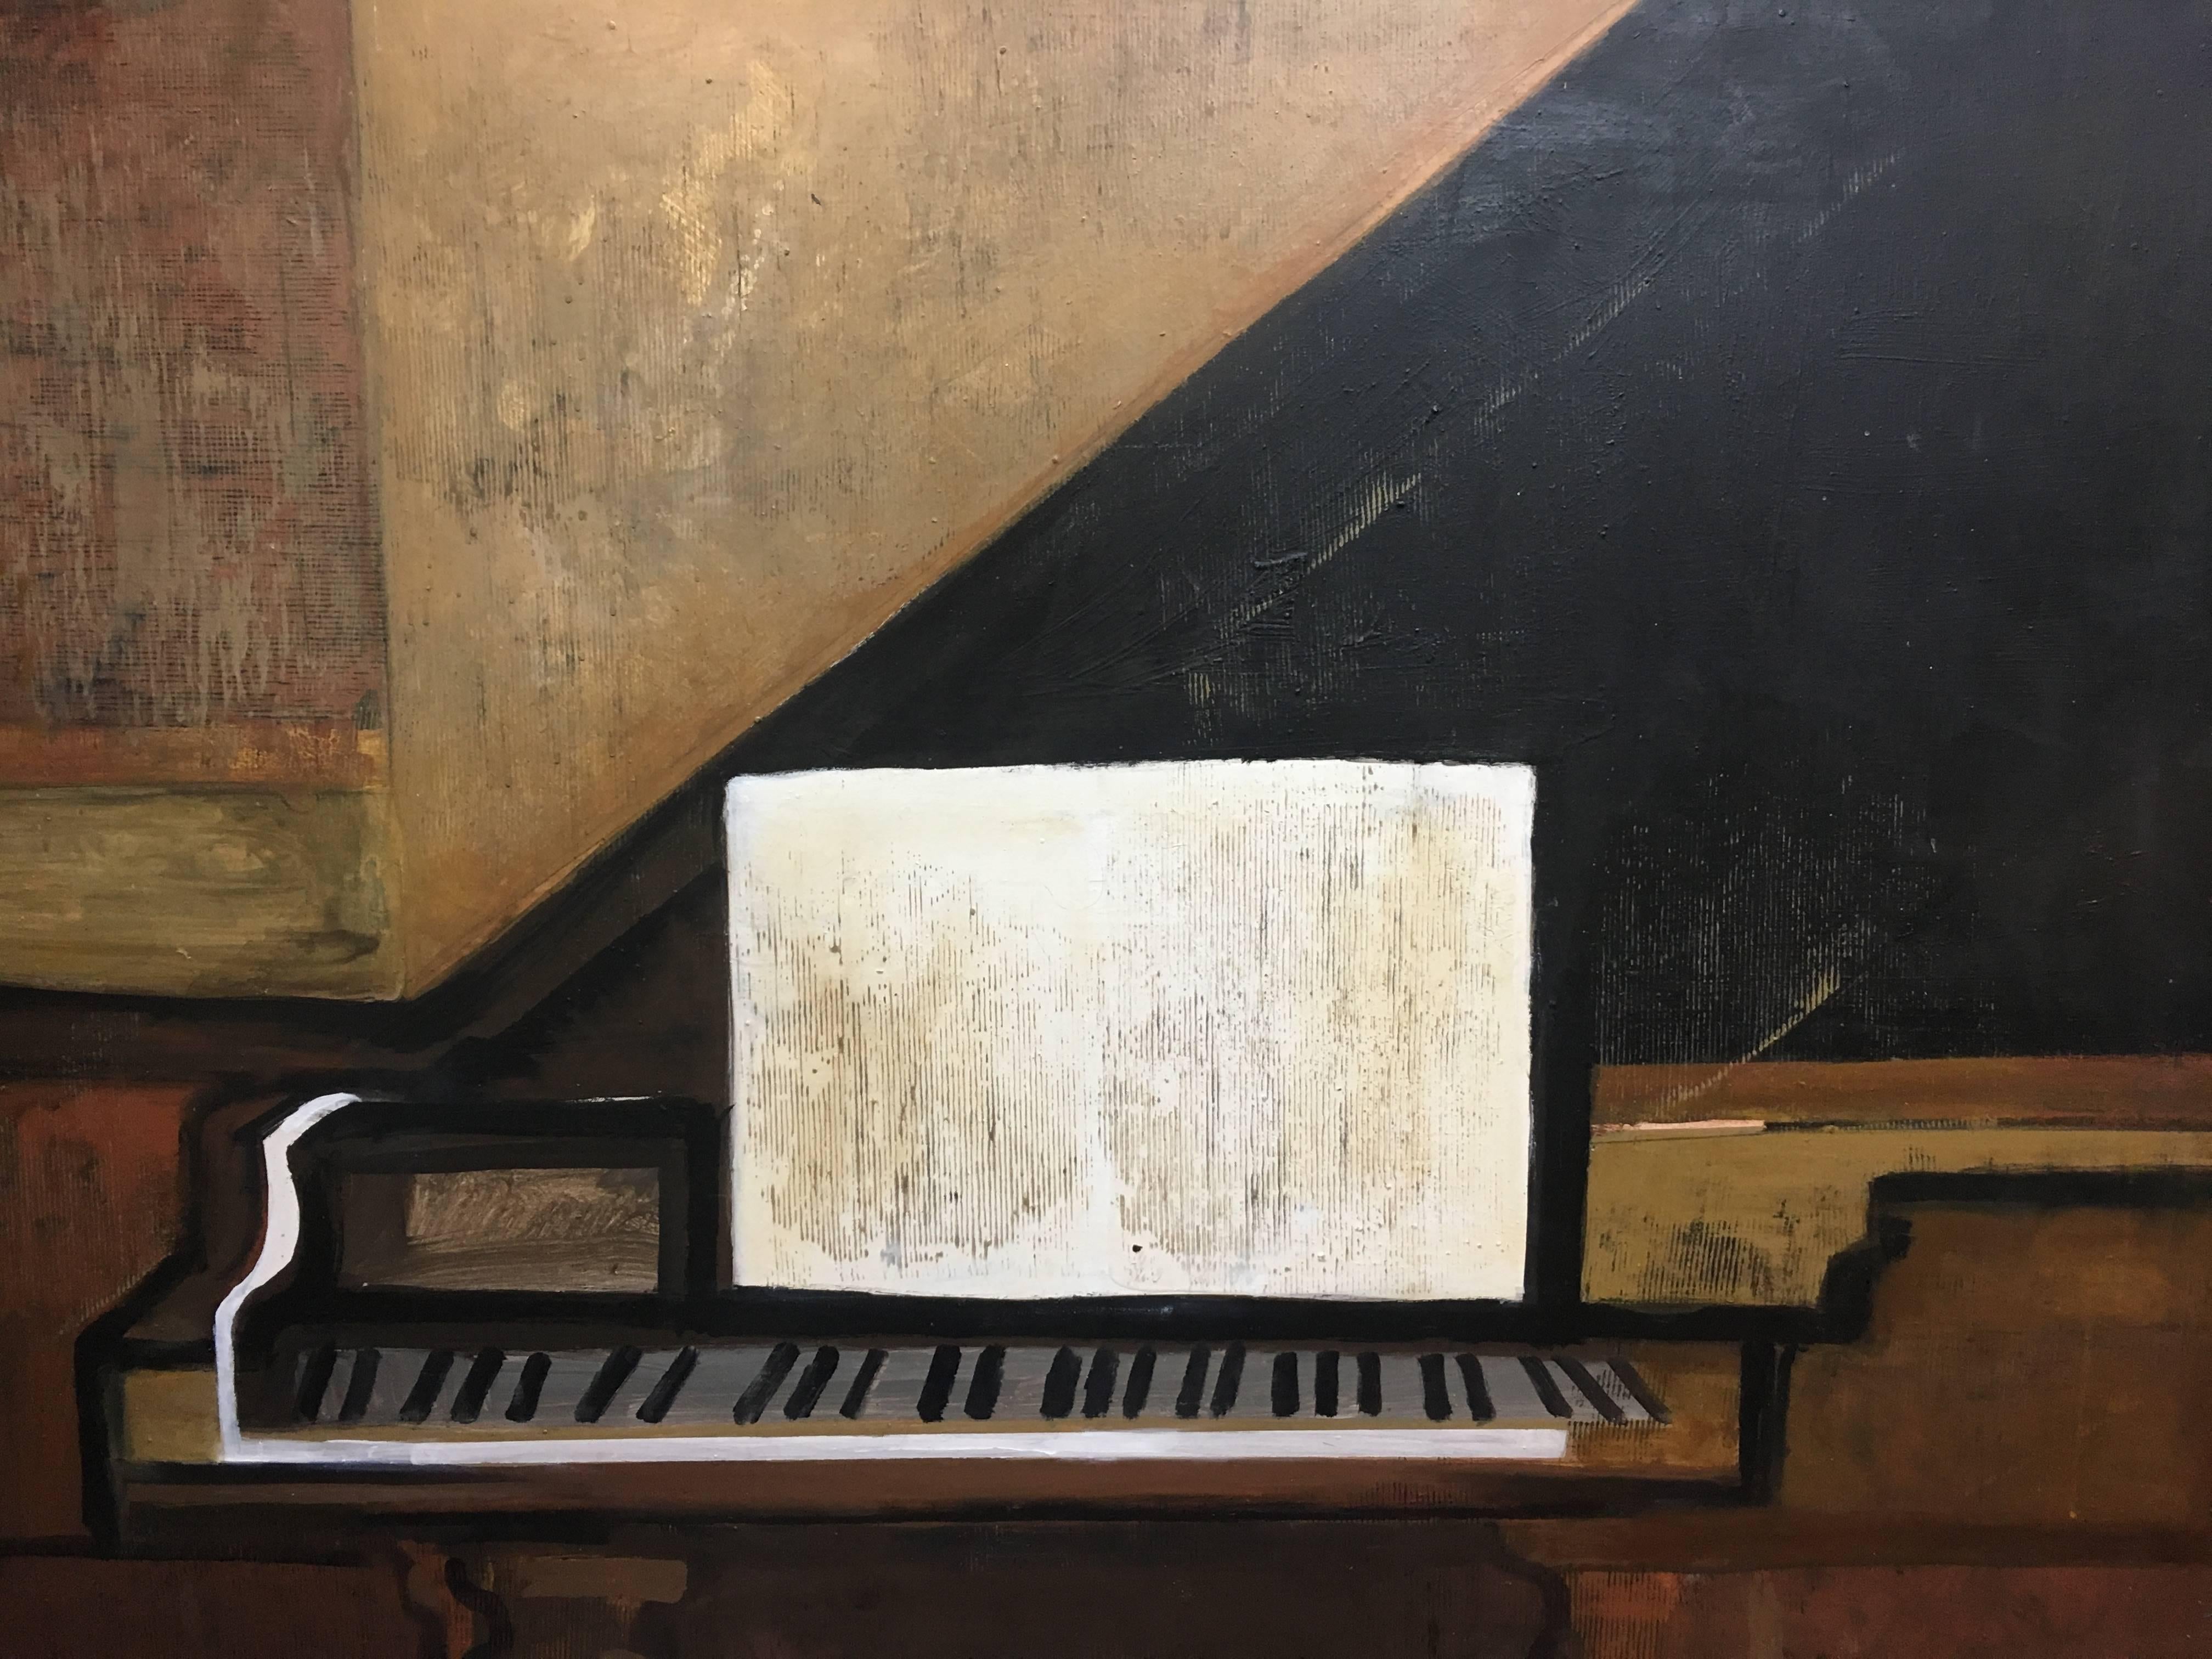 Raventos   Piano and Shett II original expressionist acrylic painting - Expressionist Painting by Maria Asuncion Raventos